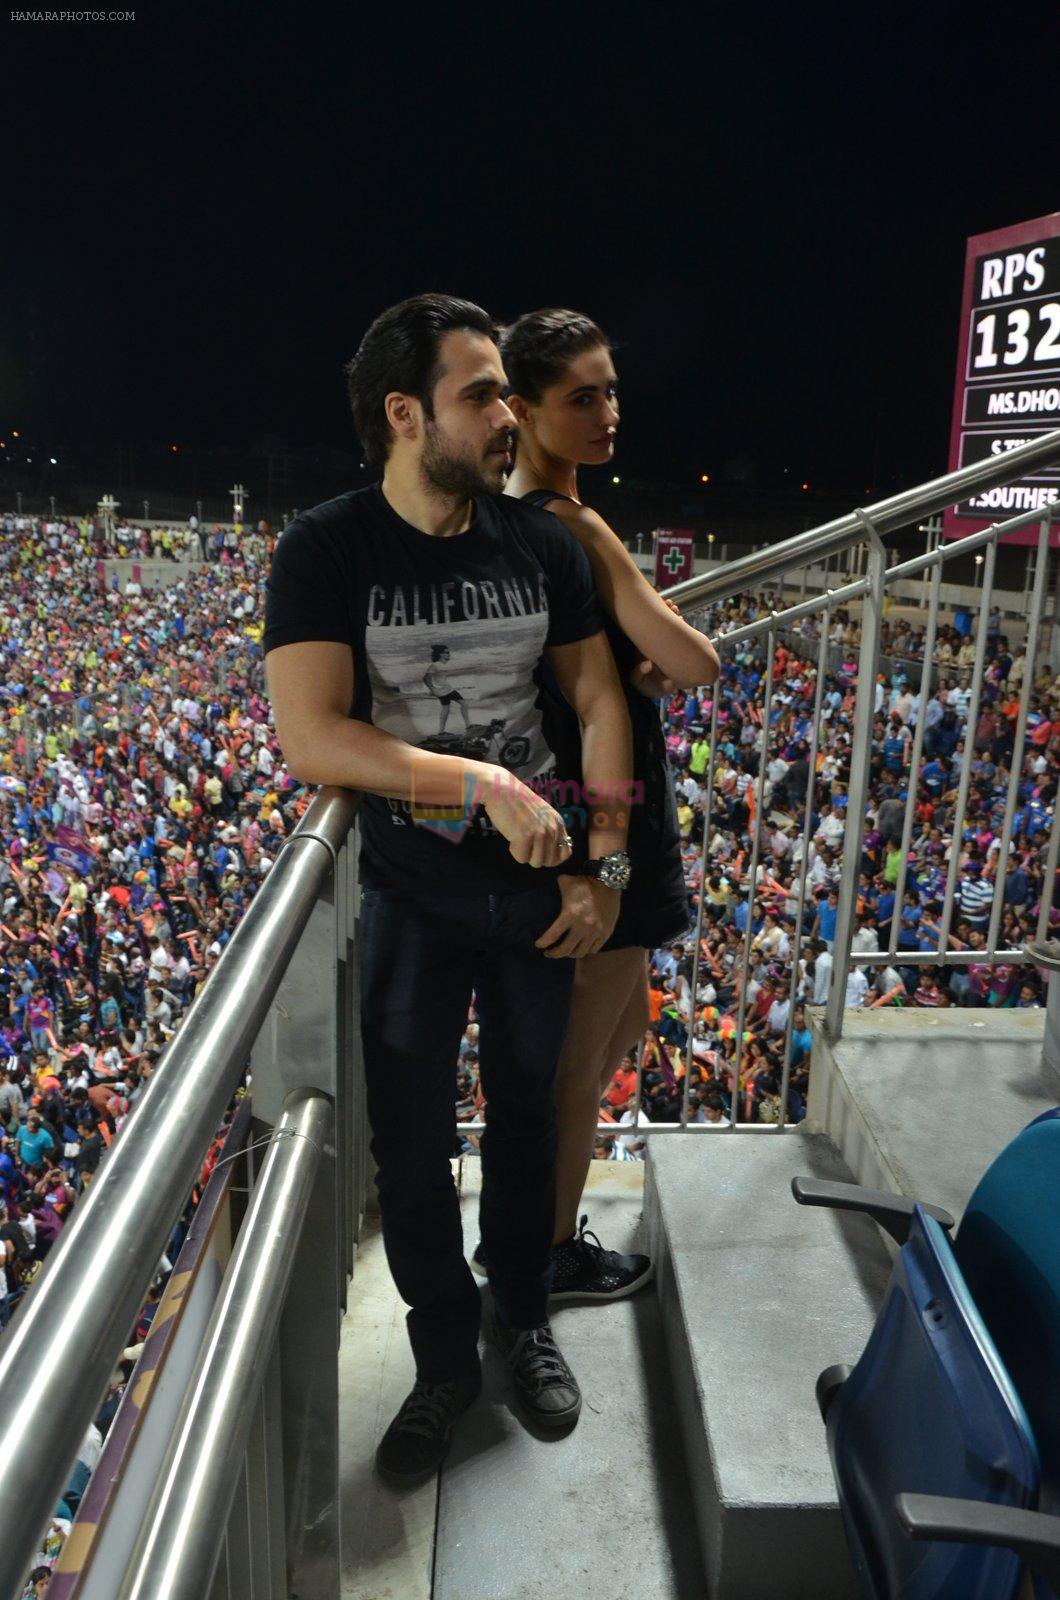 Emraan hashmi and nargis fakhri at Azhar promotions in association with Gourmet Renaissance at IPL match in Pune on 9th May 2016